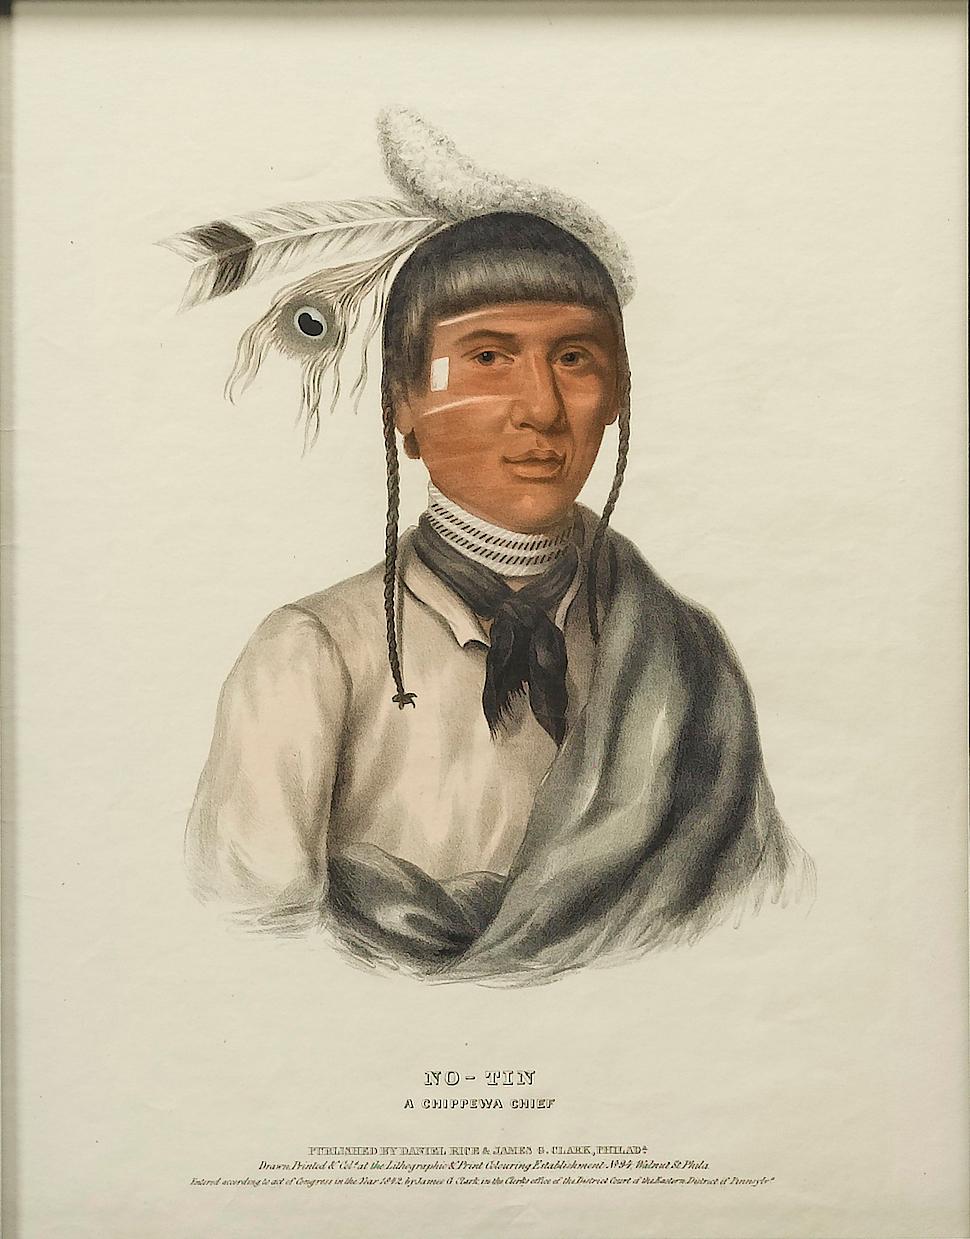 This is a striking lithographic portrait of No-Tin, a Chippewa Chief, from McKenney and Hall’s three-volume work, Indian Tribes of North America. This portrait was printed in 1838 and is paired with an antique Native American arrowhead. No-Tin, also